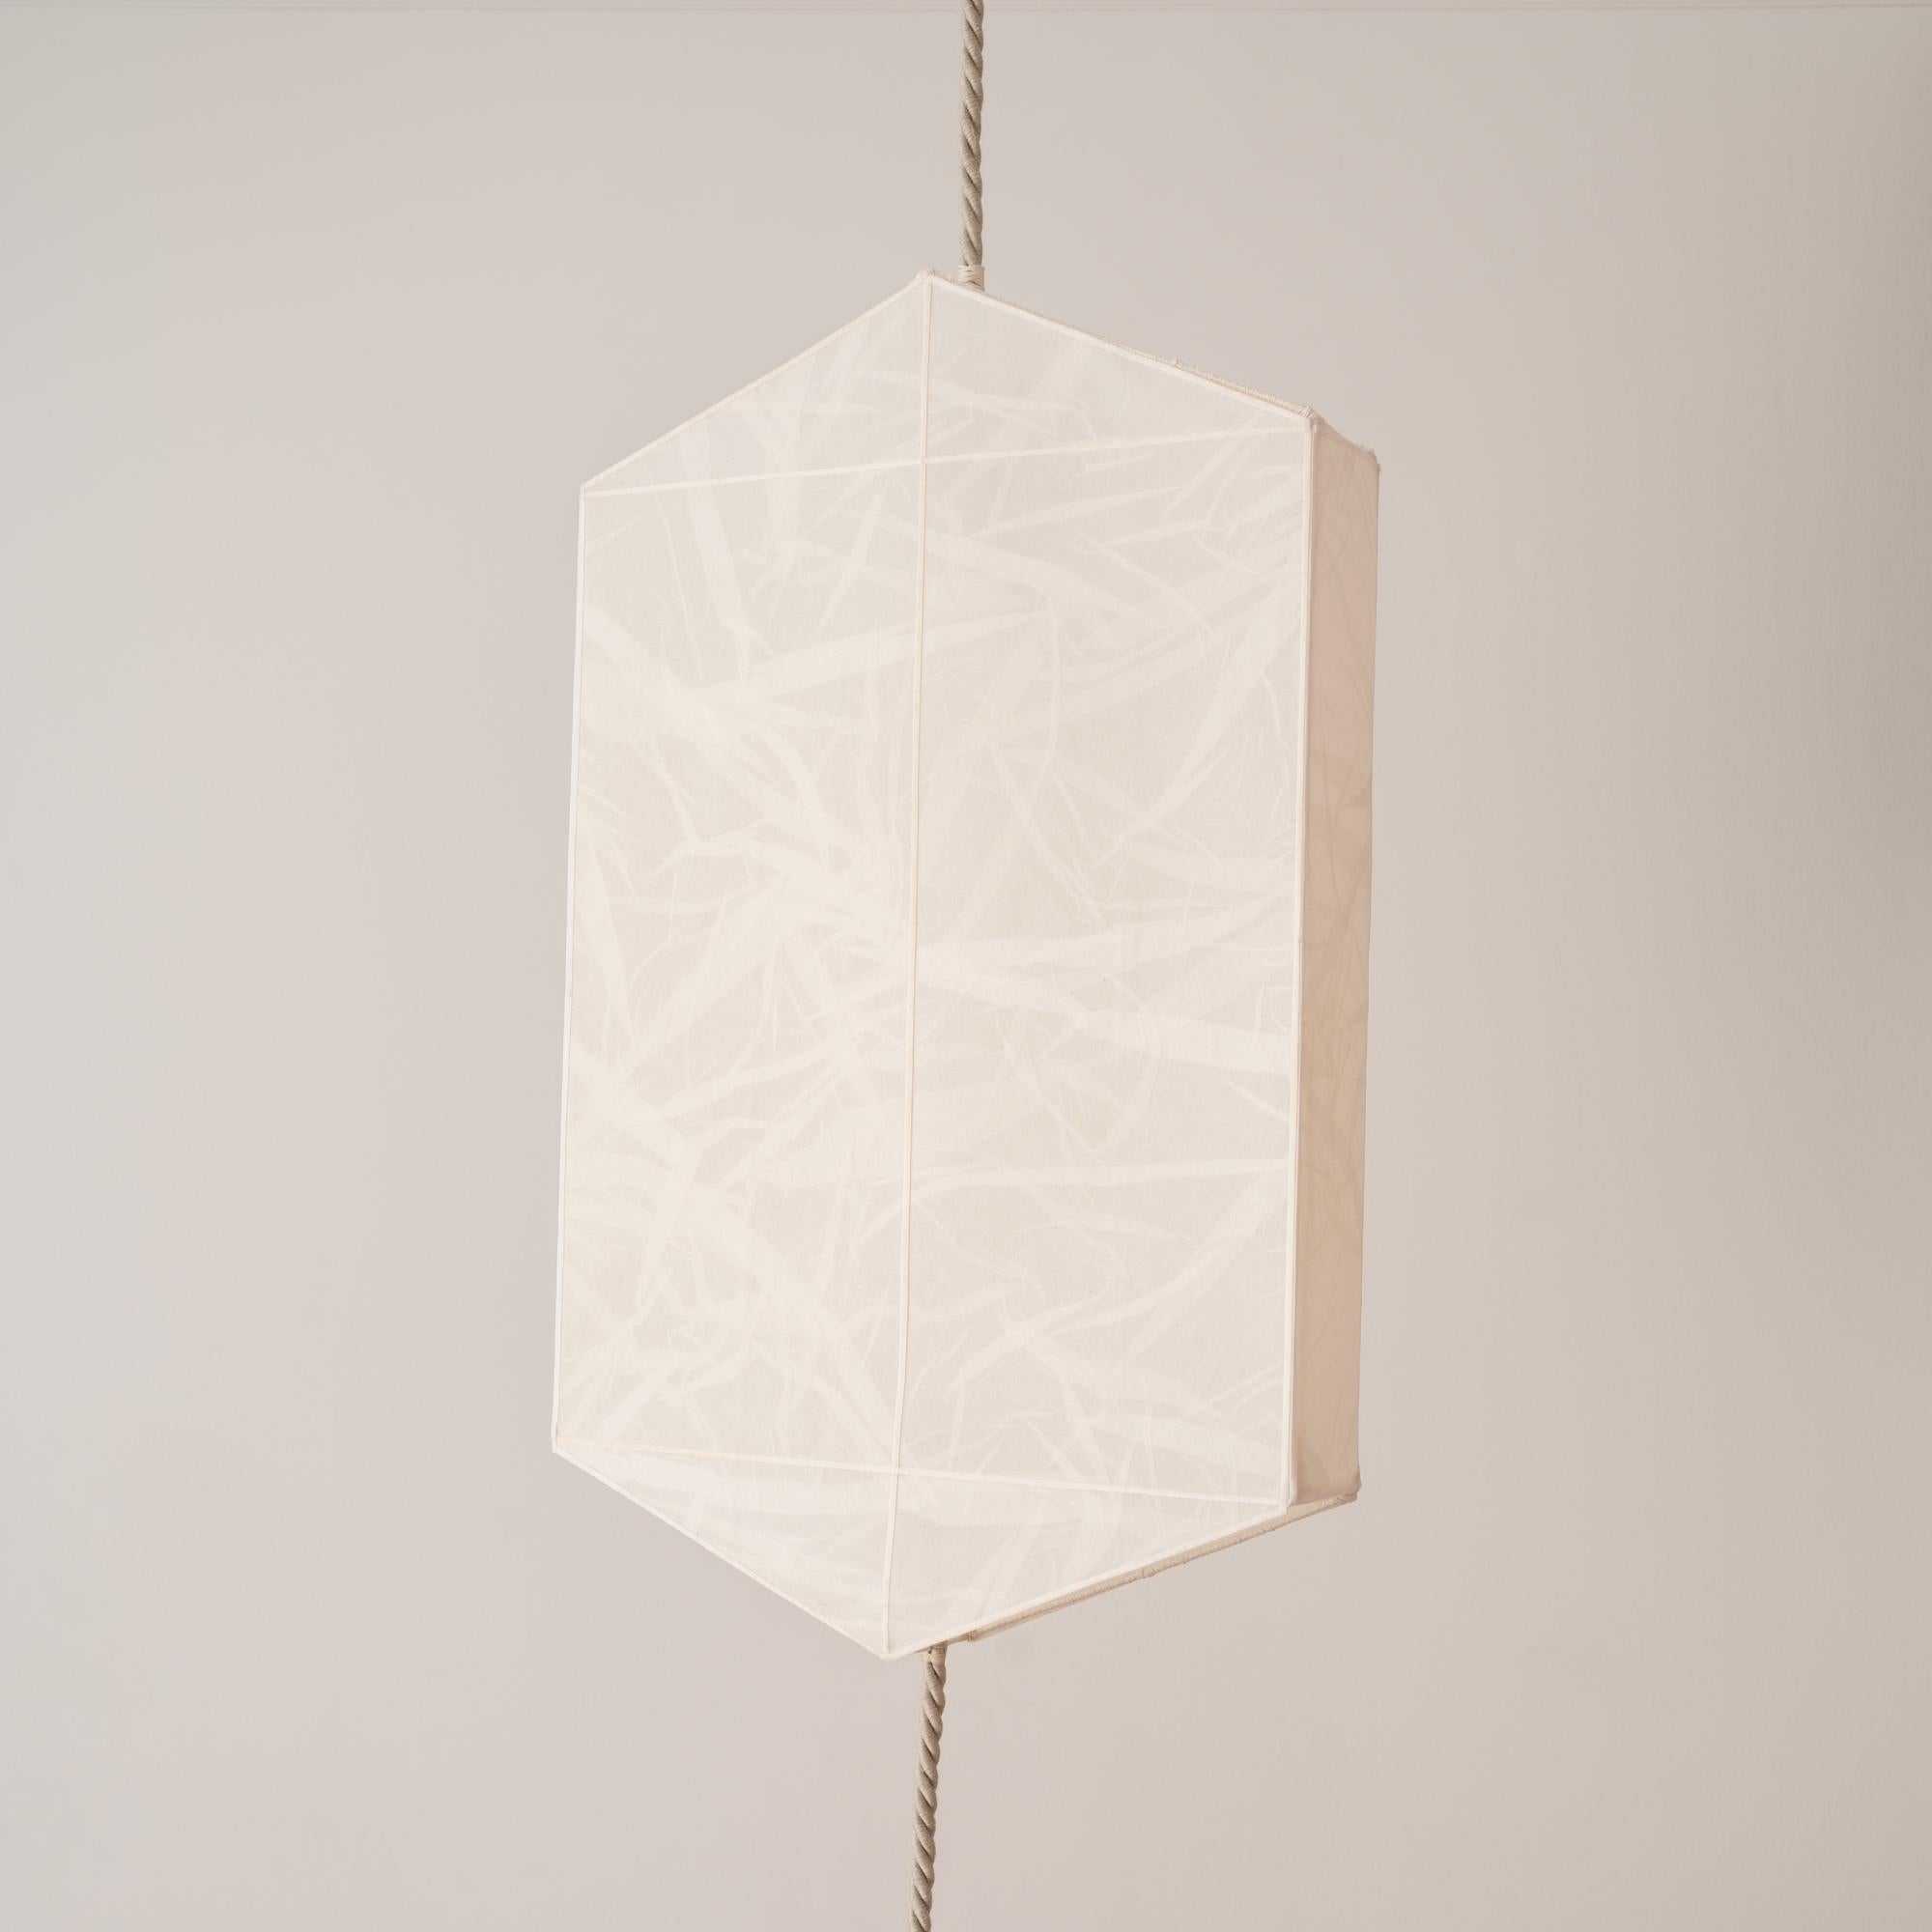 One-of-a-Kind Hanging Lantern-style Lamp of Silk Organza, Rope and Raw Stone In New Condition For Sale In New York, NY